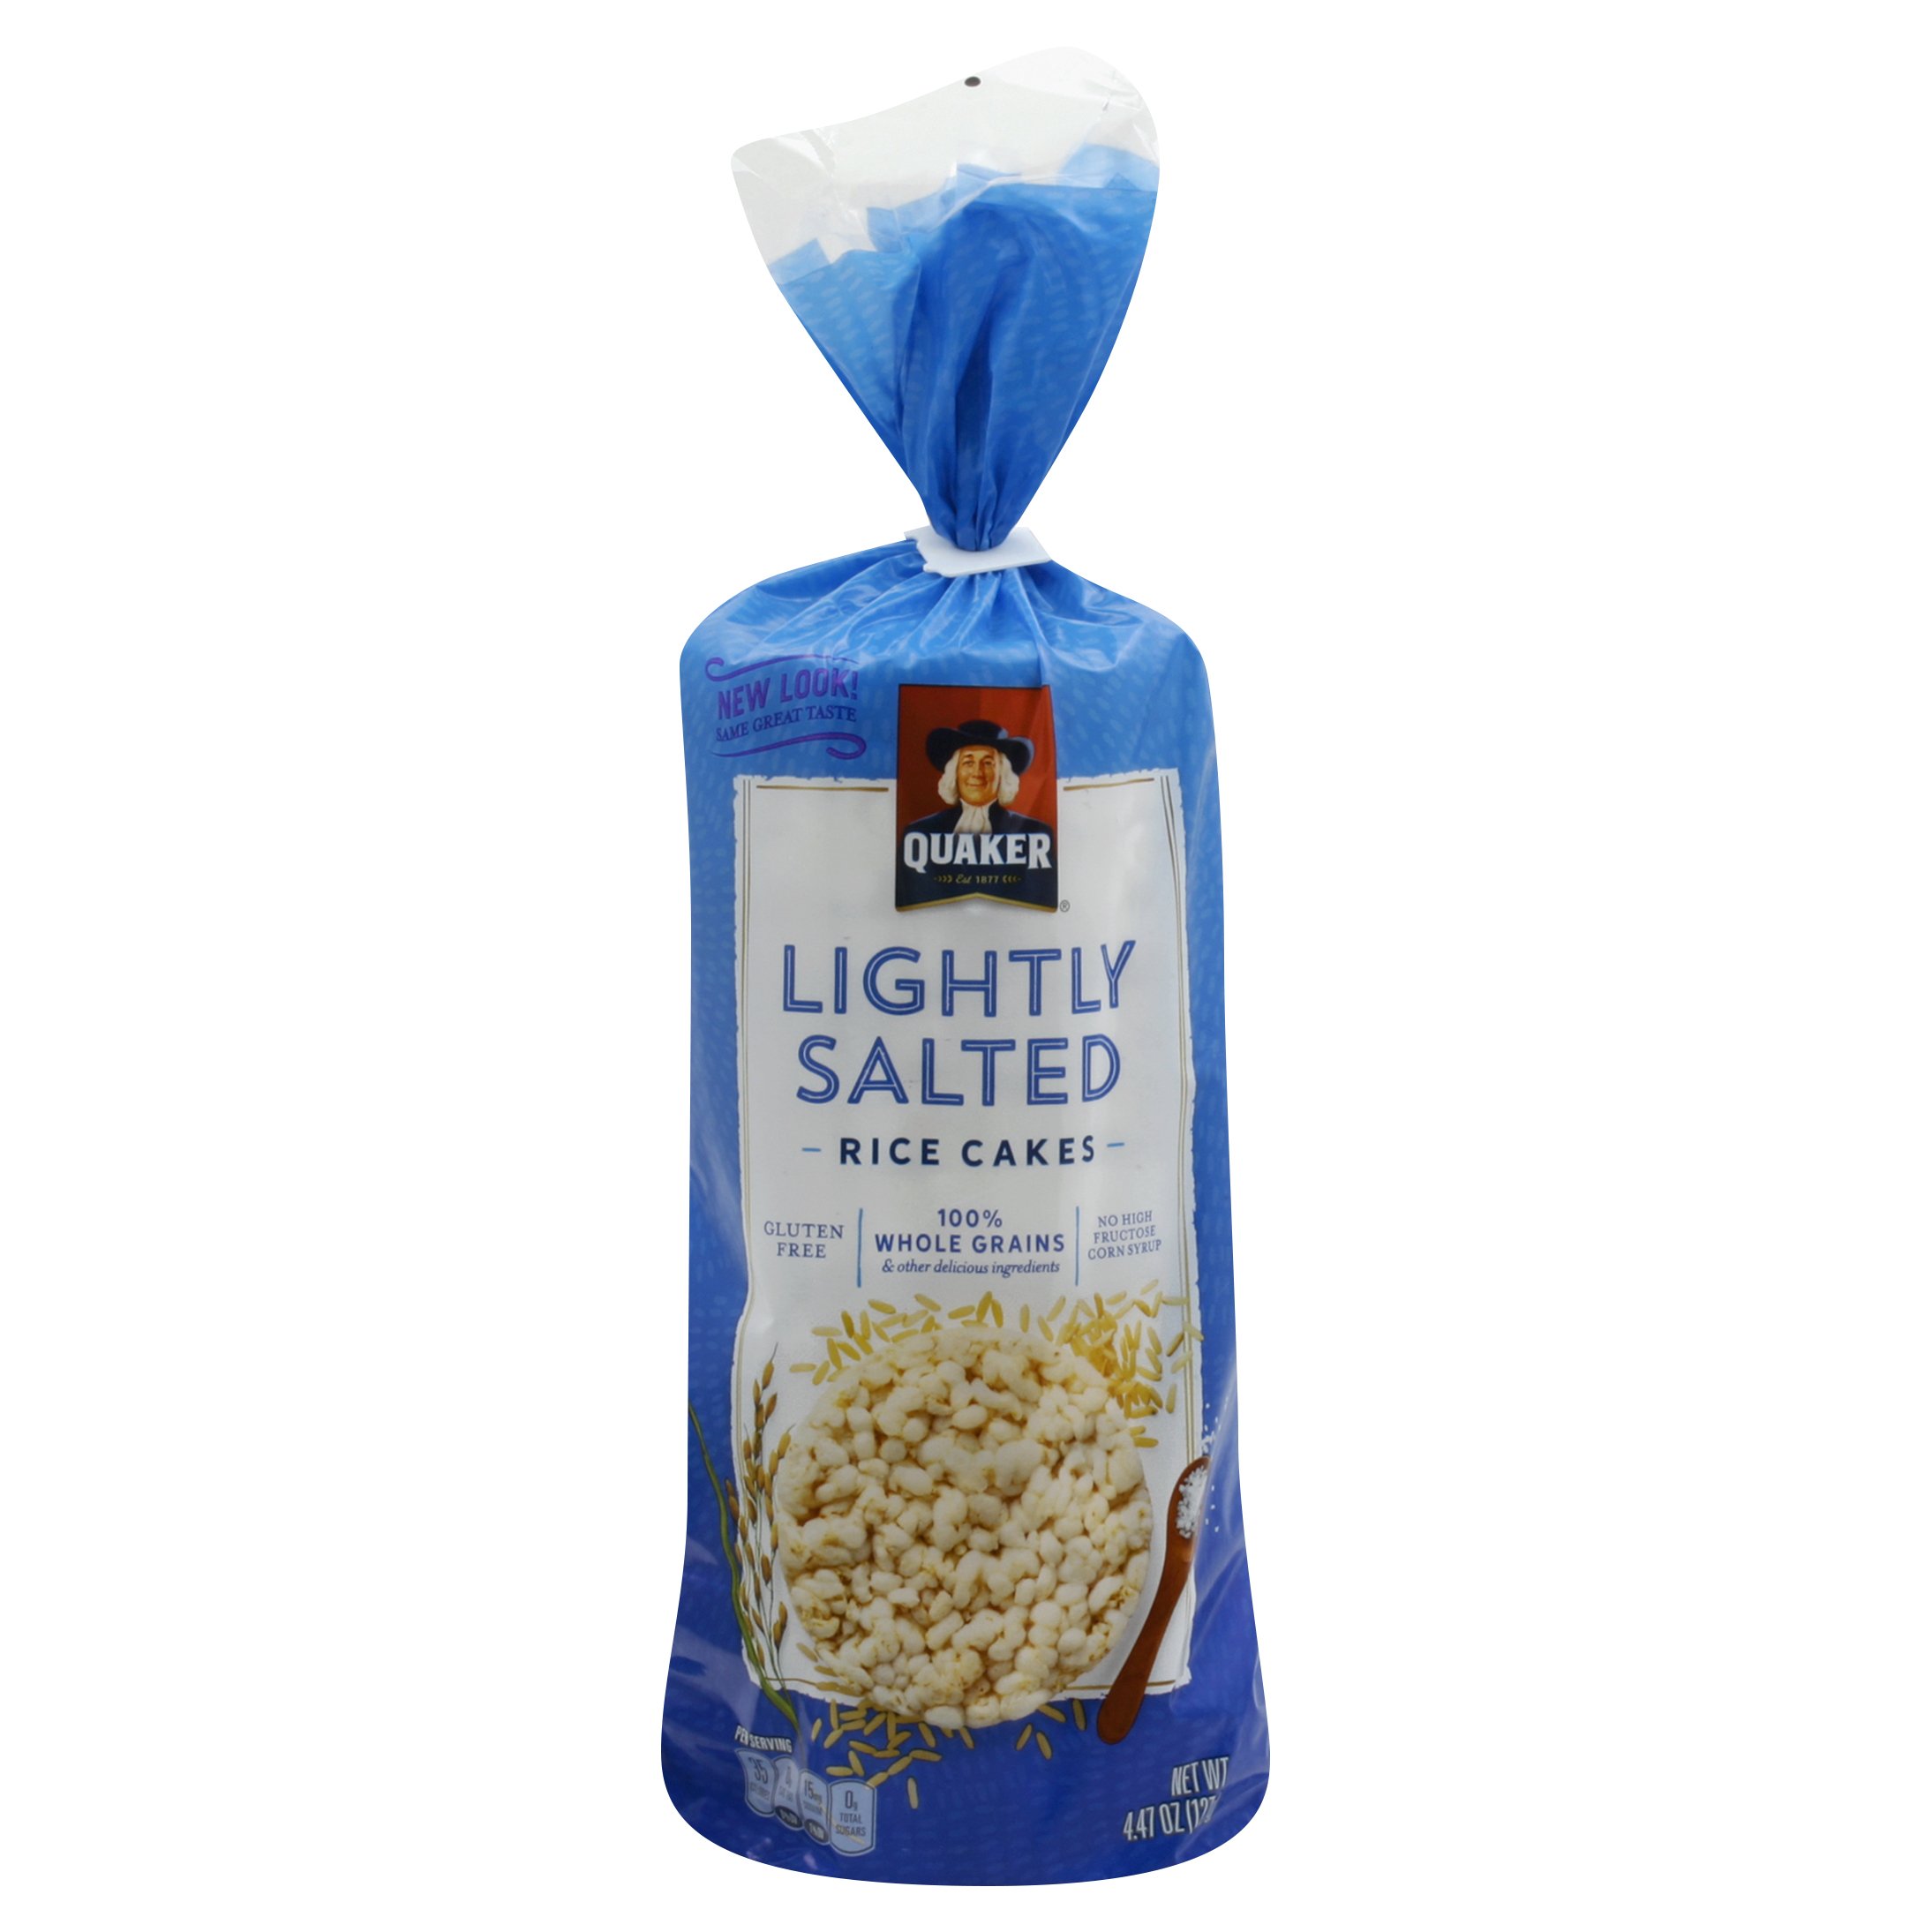 Quaker Lightly Salted Rice Cakes 4.5 OZ 12-Pack